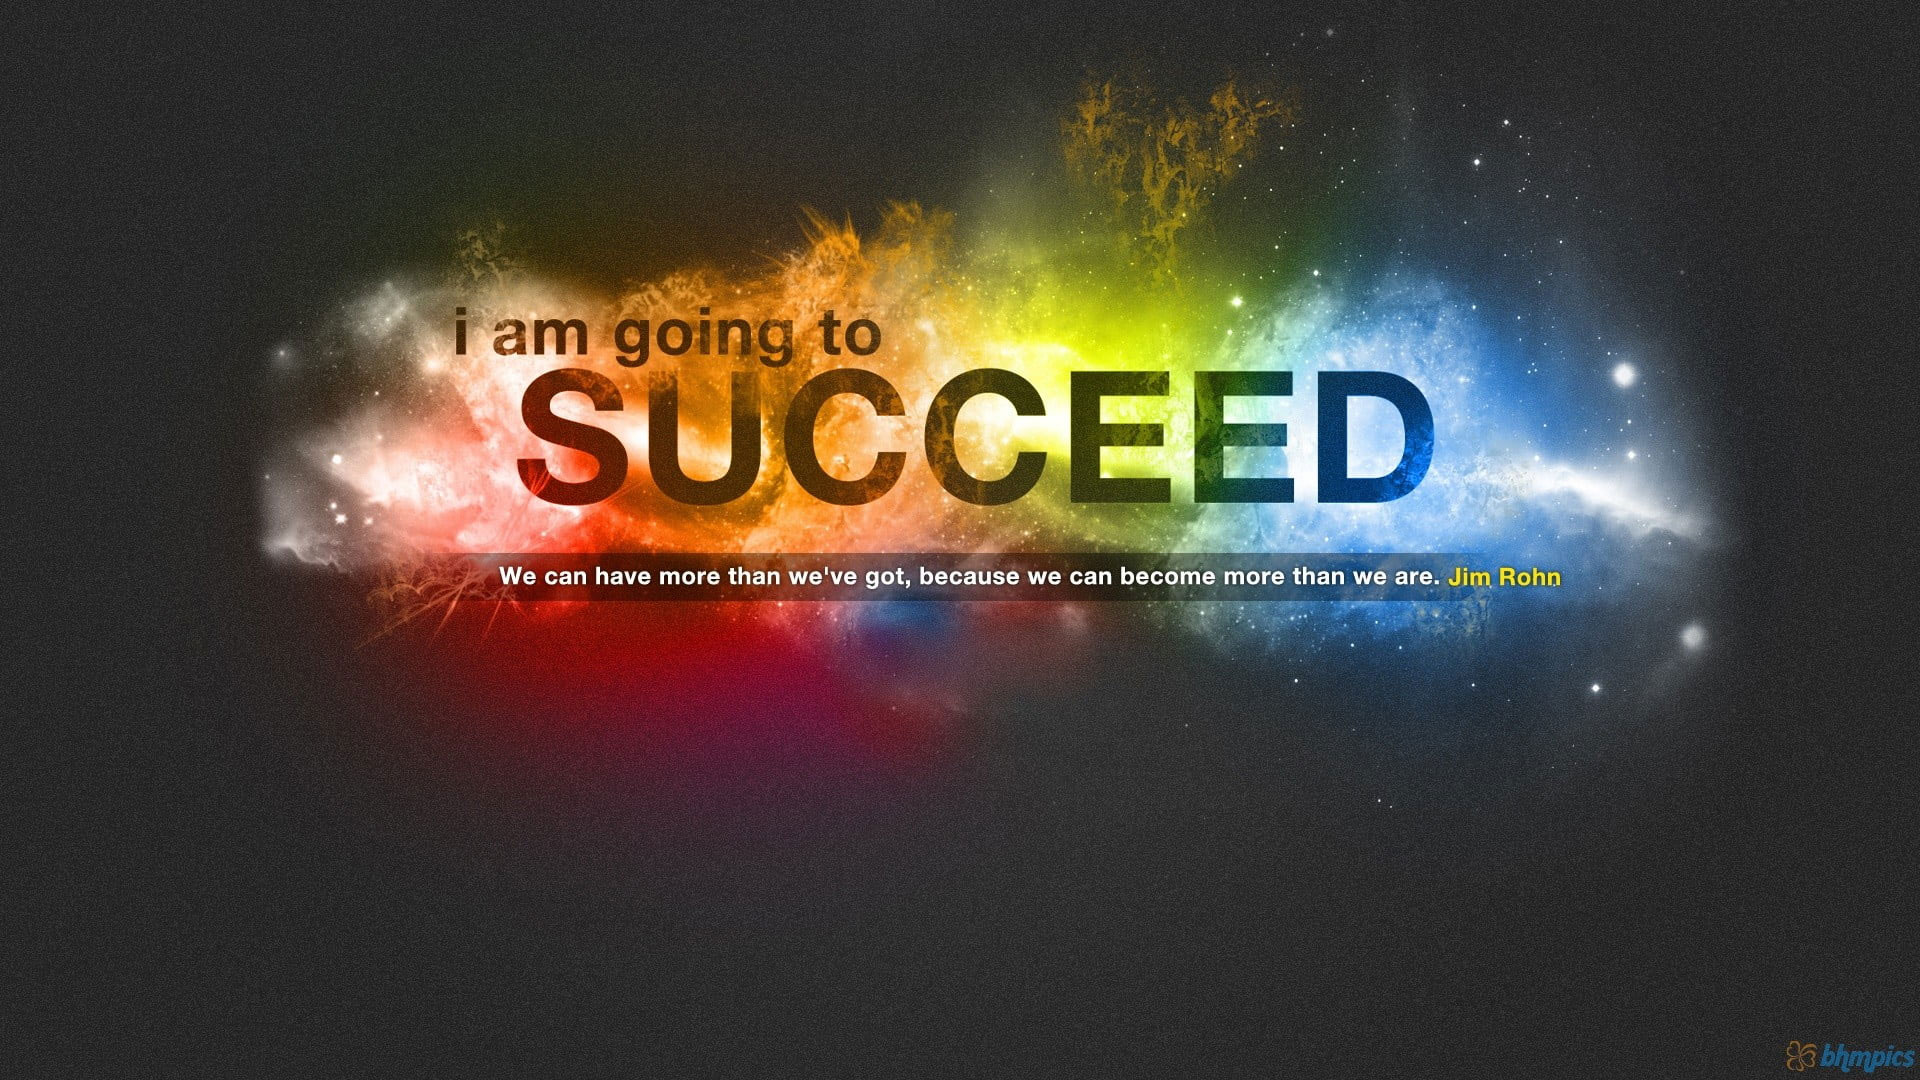 I Am Going to Succeed illustration, quote, colorful, motivational